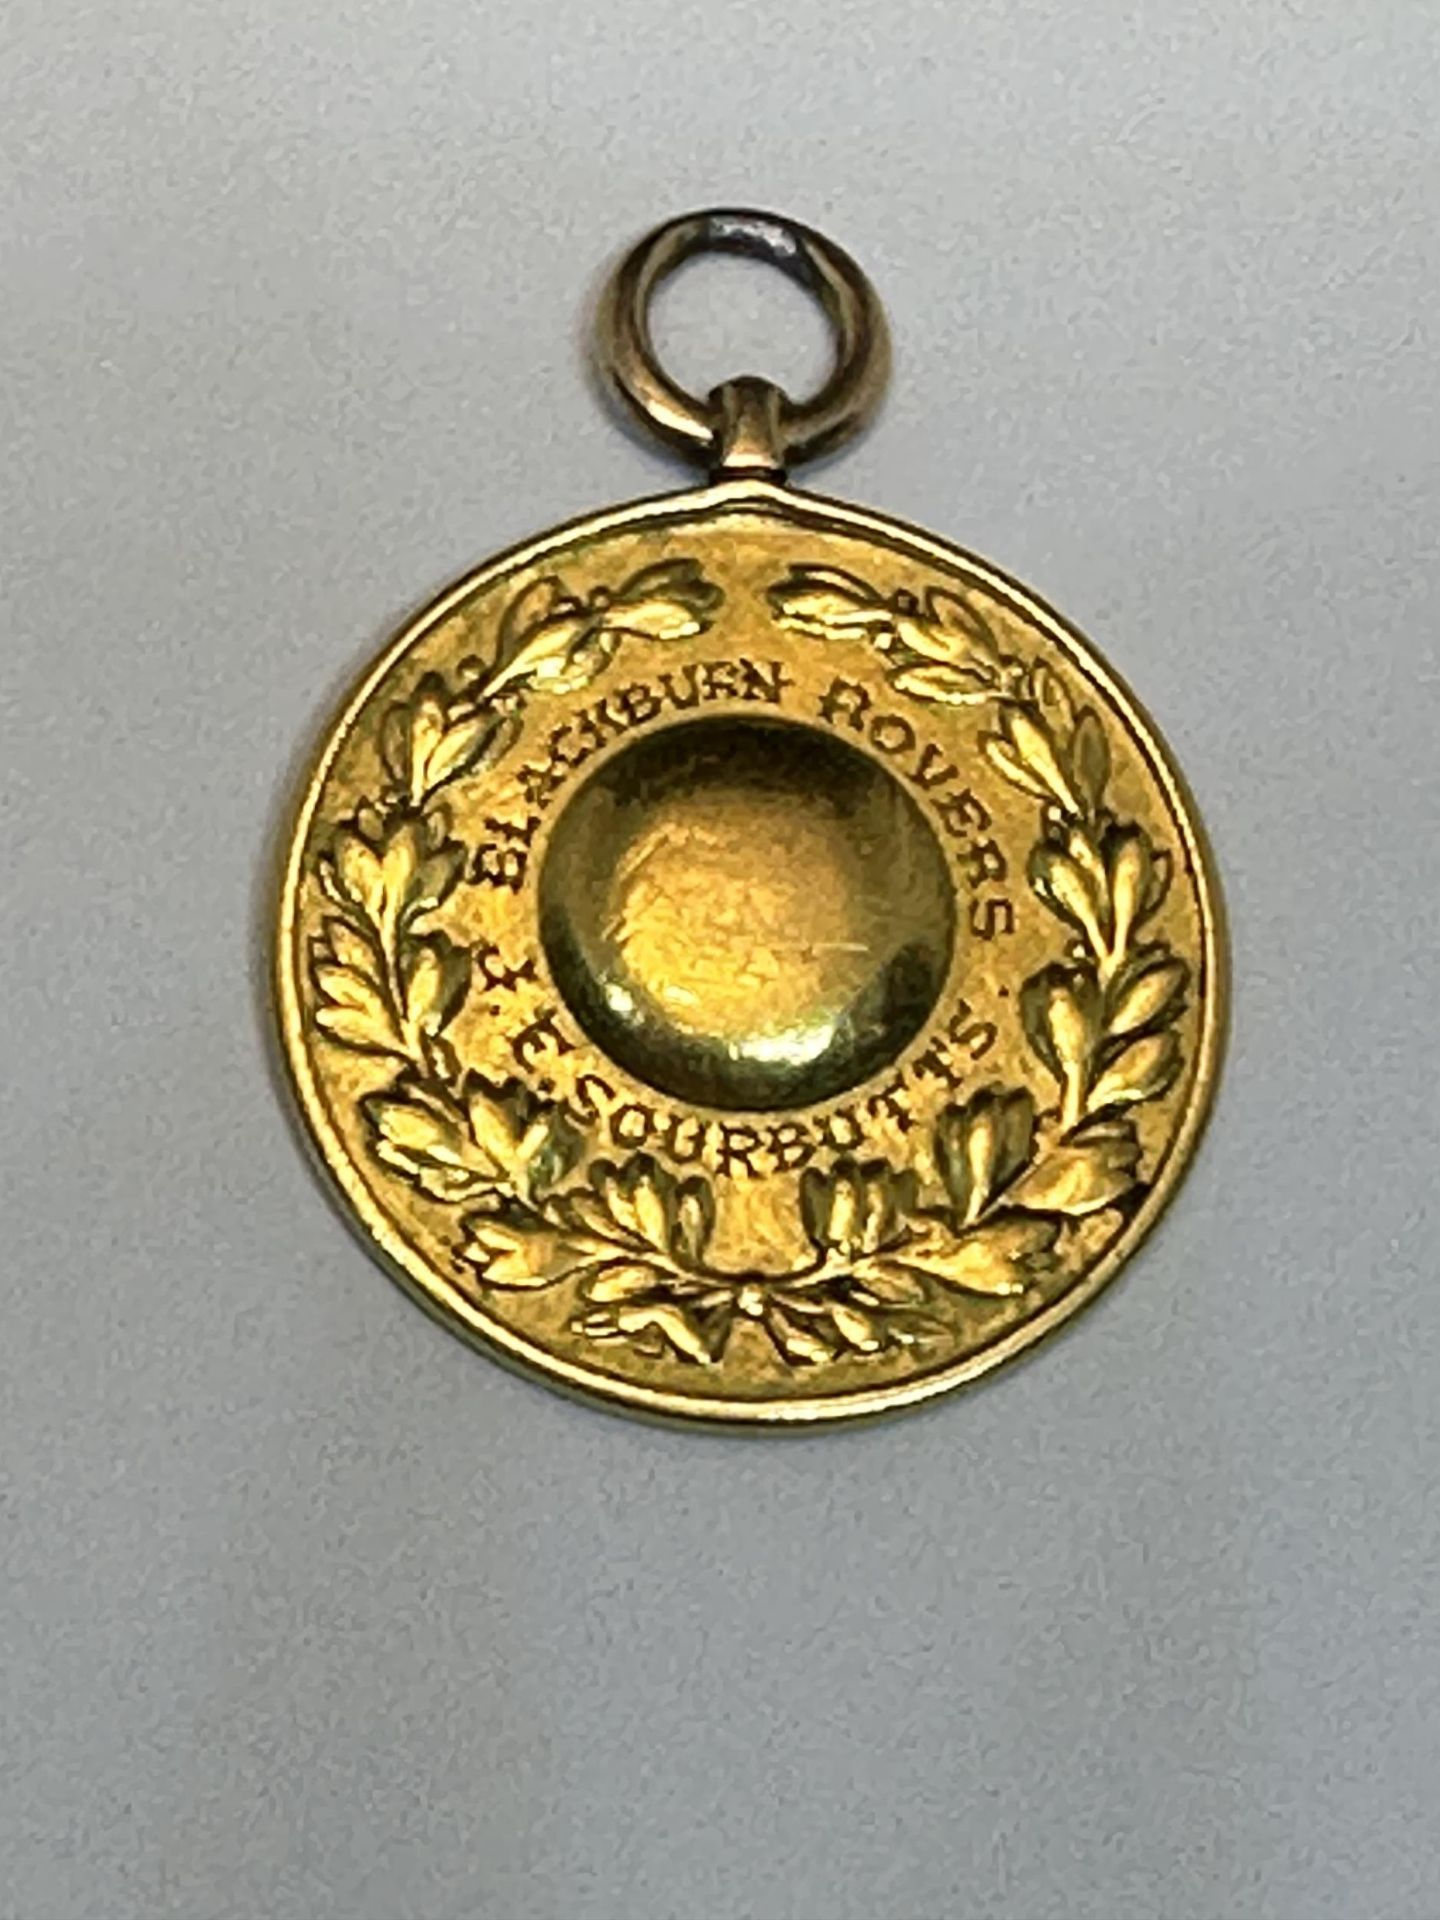 AN 1883/4 F.A. CUP FINAL WINNER'S MEDAL. THIS MEDAL IS TESTED TO 22 CARAT GOLD AND WAS AWARDED TO - Image 2 of 3